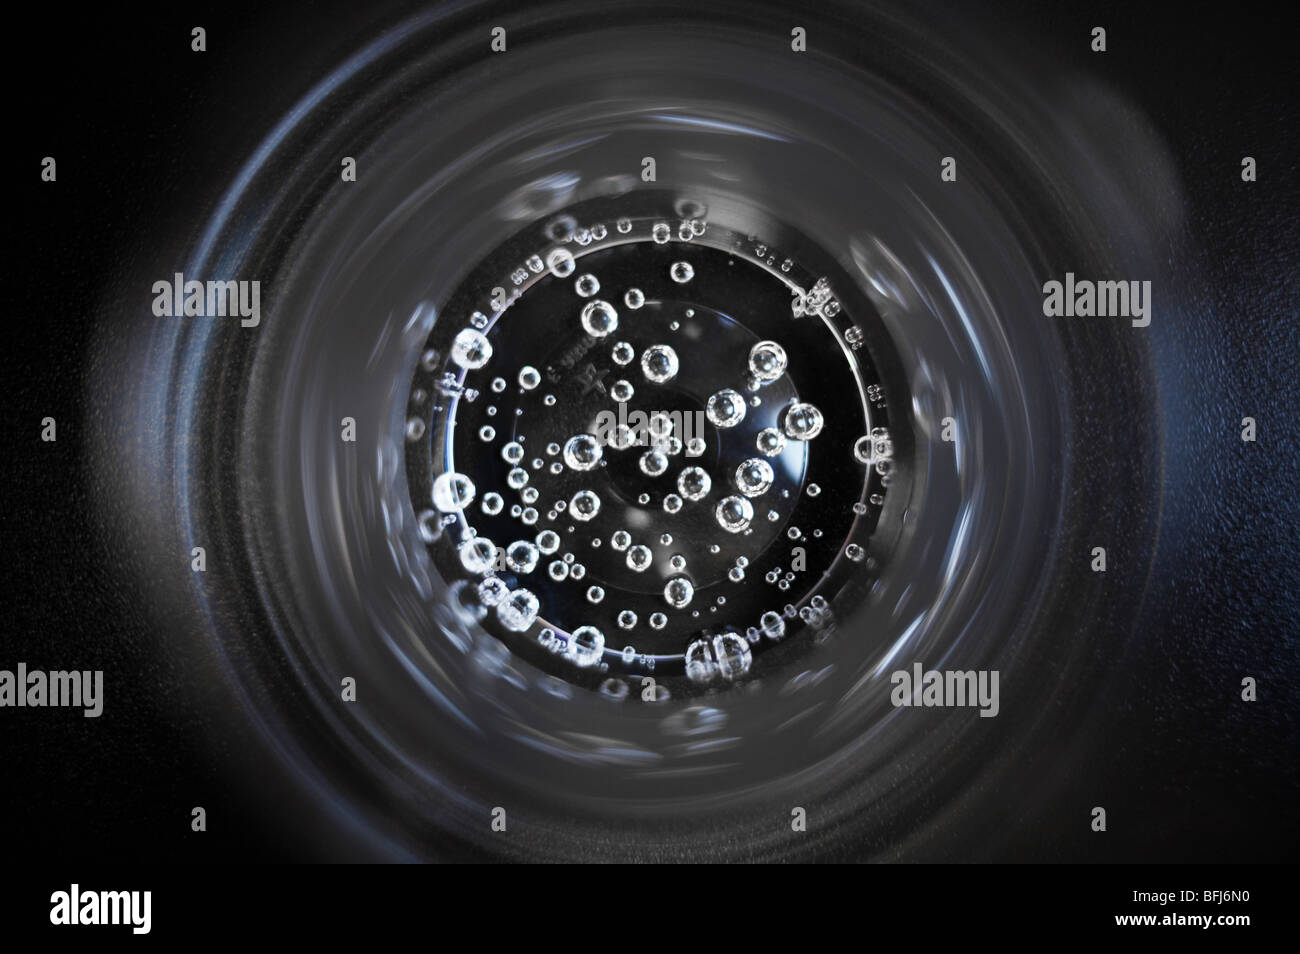 Bubbles in a glass of water, close-up. Stock Photo